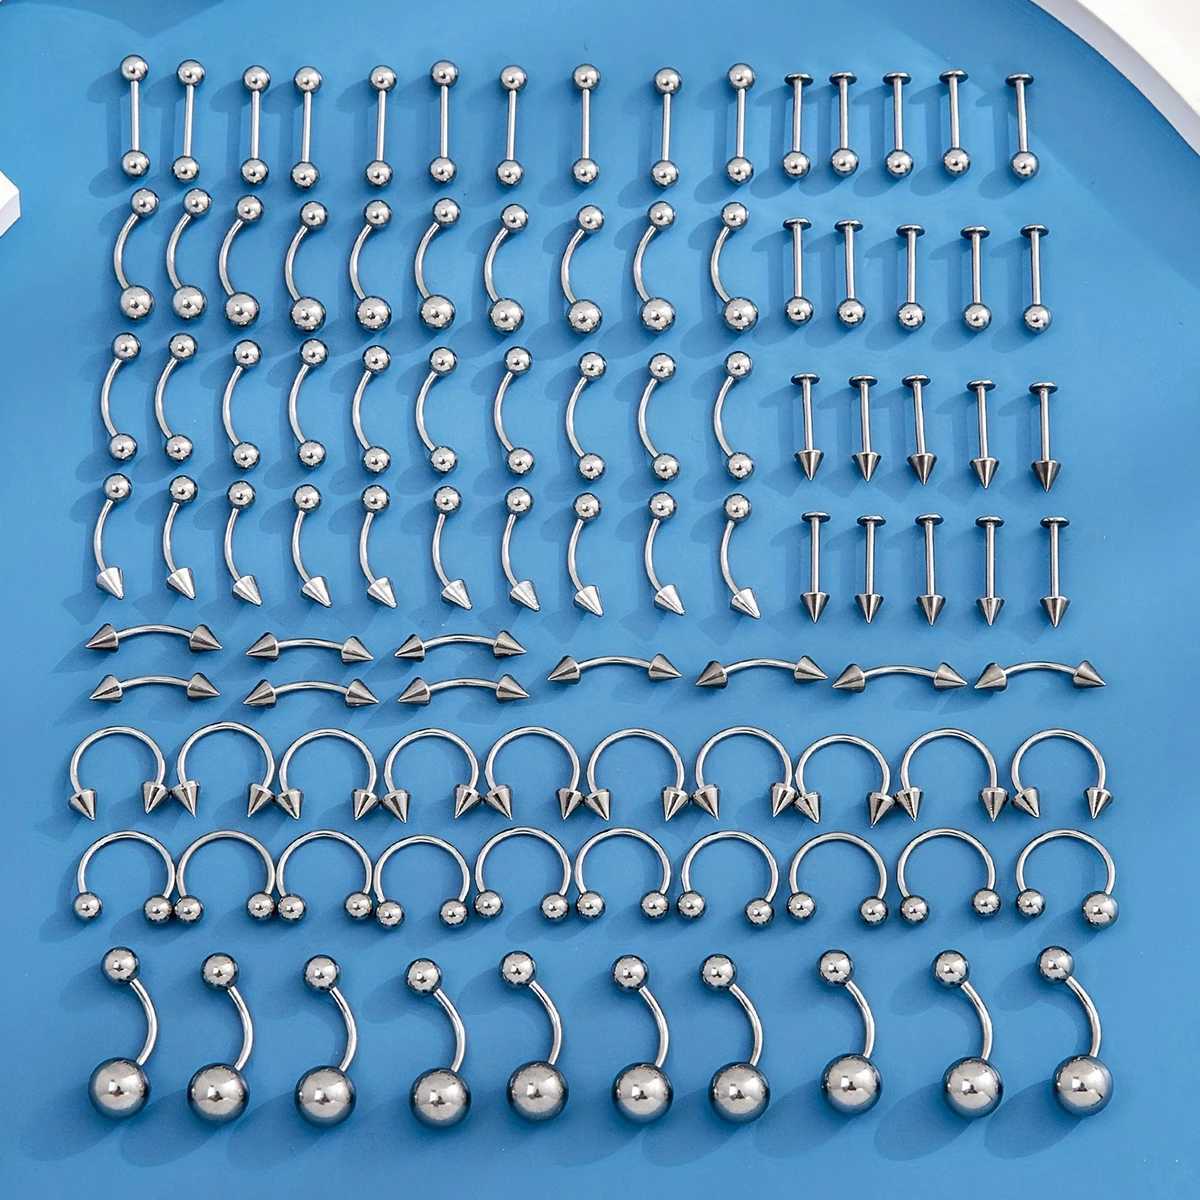 Body Arts Surgical Steel Body Piercing Jewelry Bulk Nose Ring Tongue Bar Eyebrow Labret Piercing Set Horseshoe Ring Pack d240503